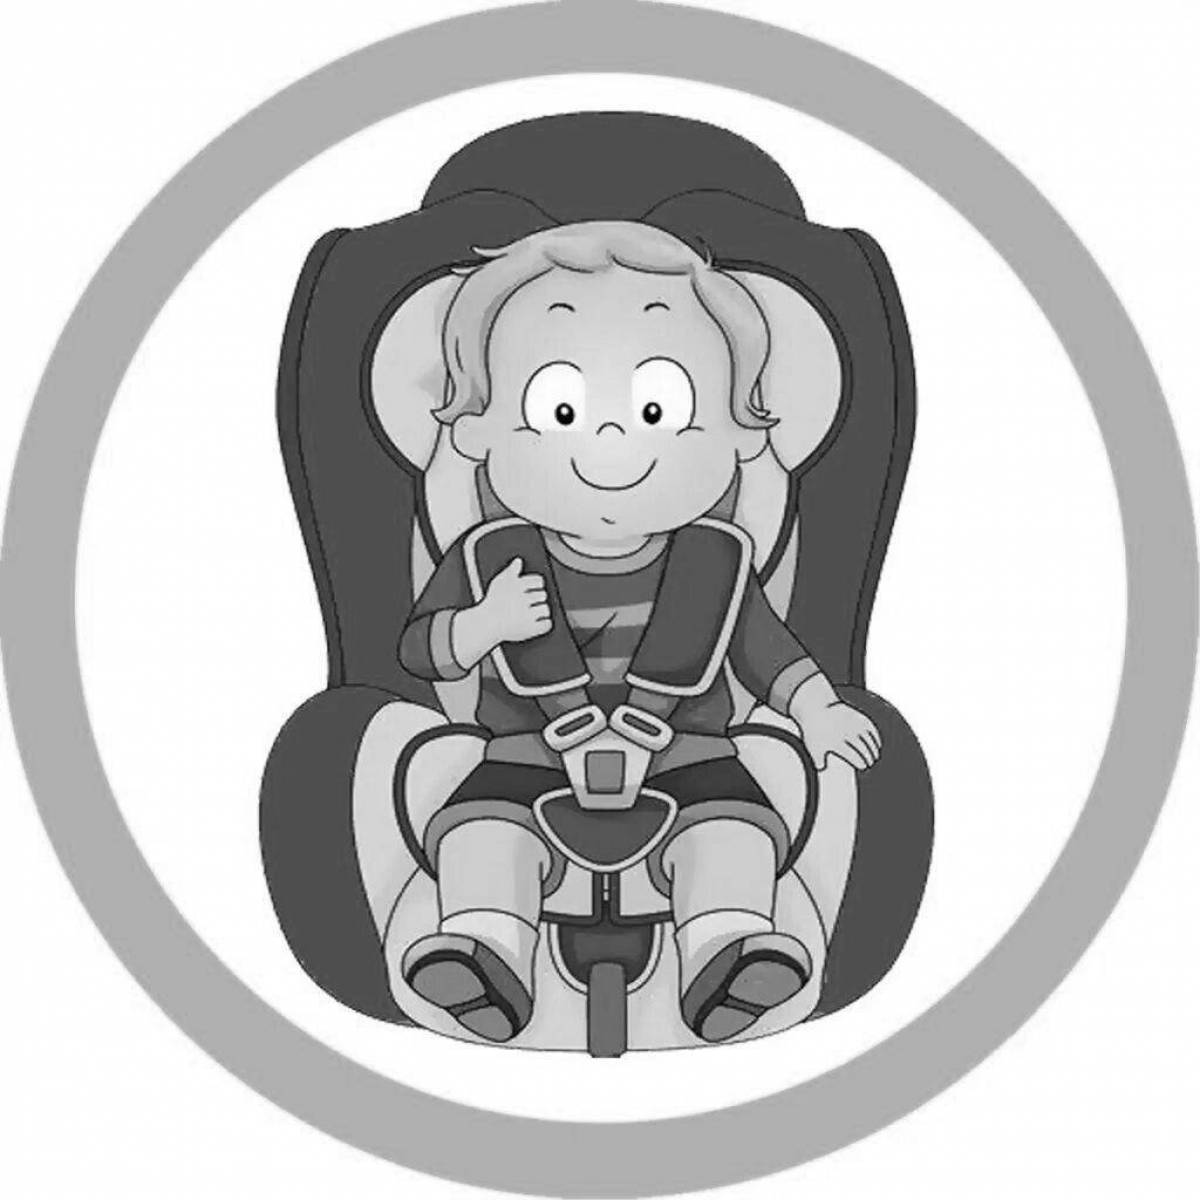 Glimmering car seat coloring page